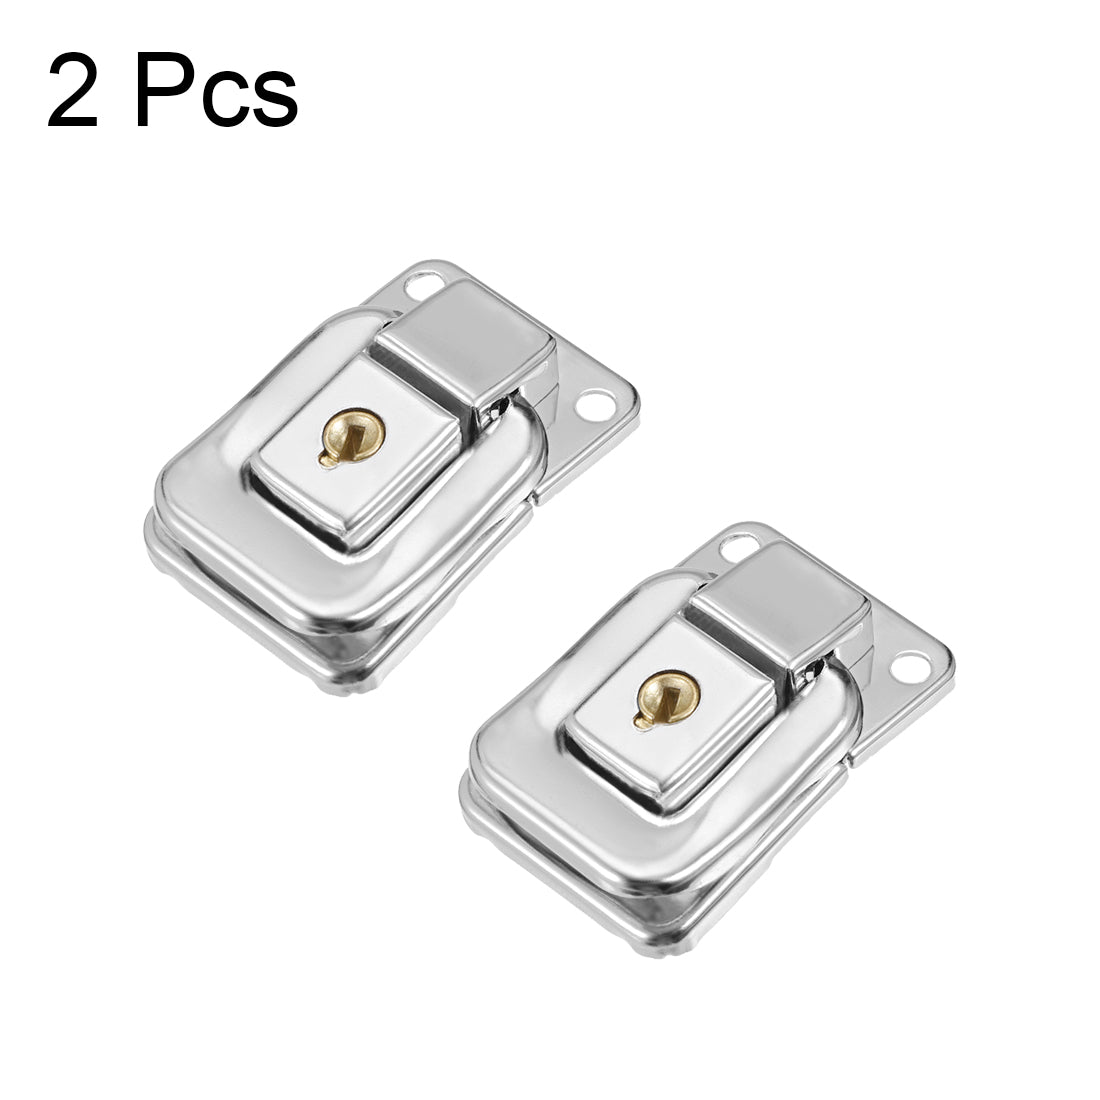 uxcell Uxcell 41mm x 28mm Metal Small Size Suitcase Hasp Catch Latch with Keys and Screws 2 Pcs